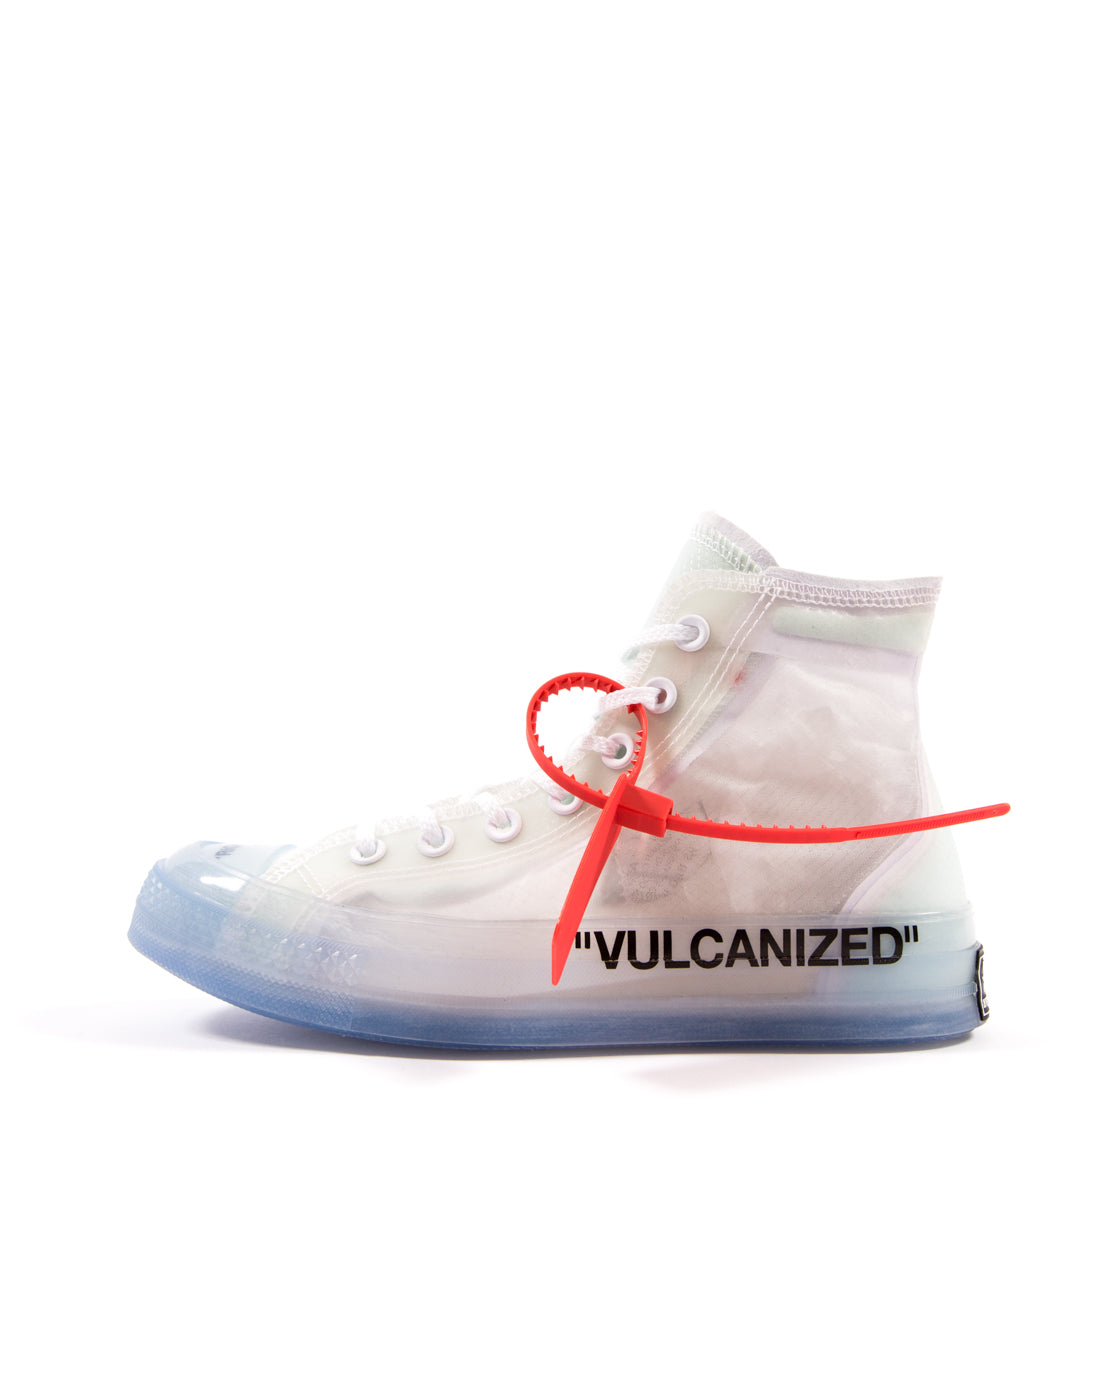 off white converse all star